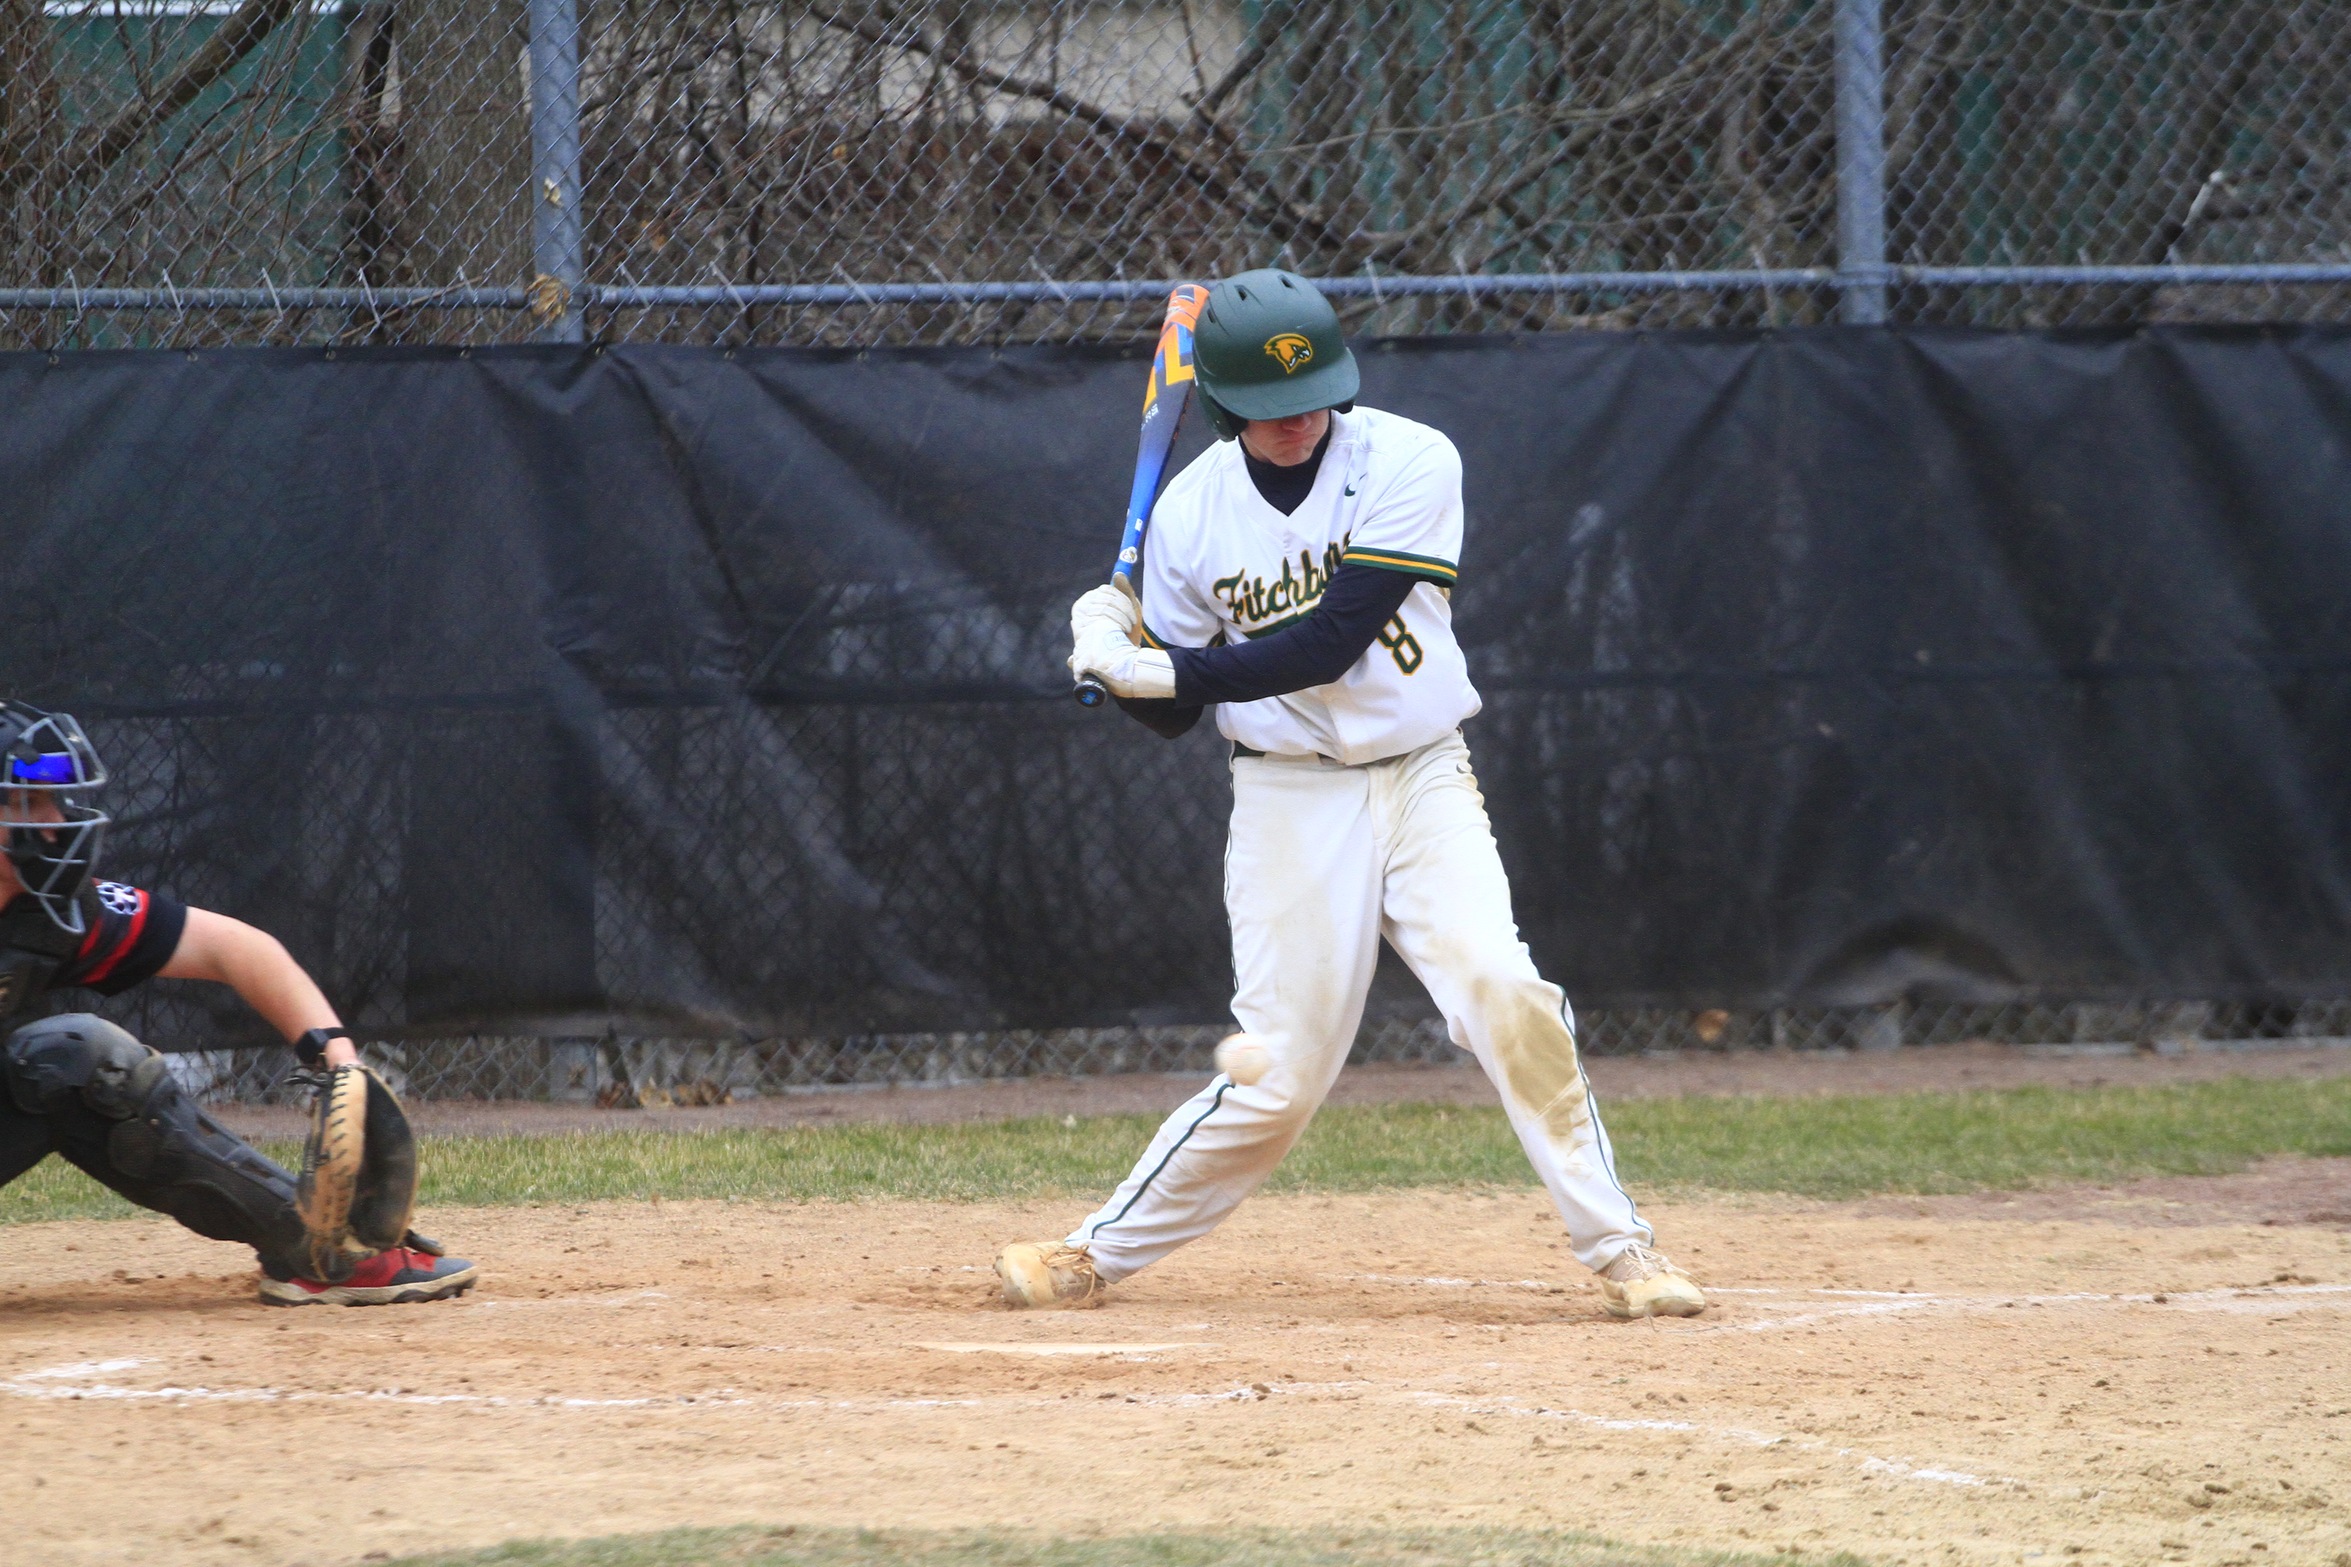 Baseball Drops Pair To Buccaneers In Conference Twin Bill